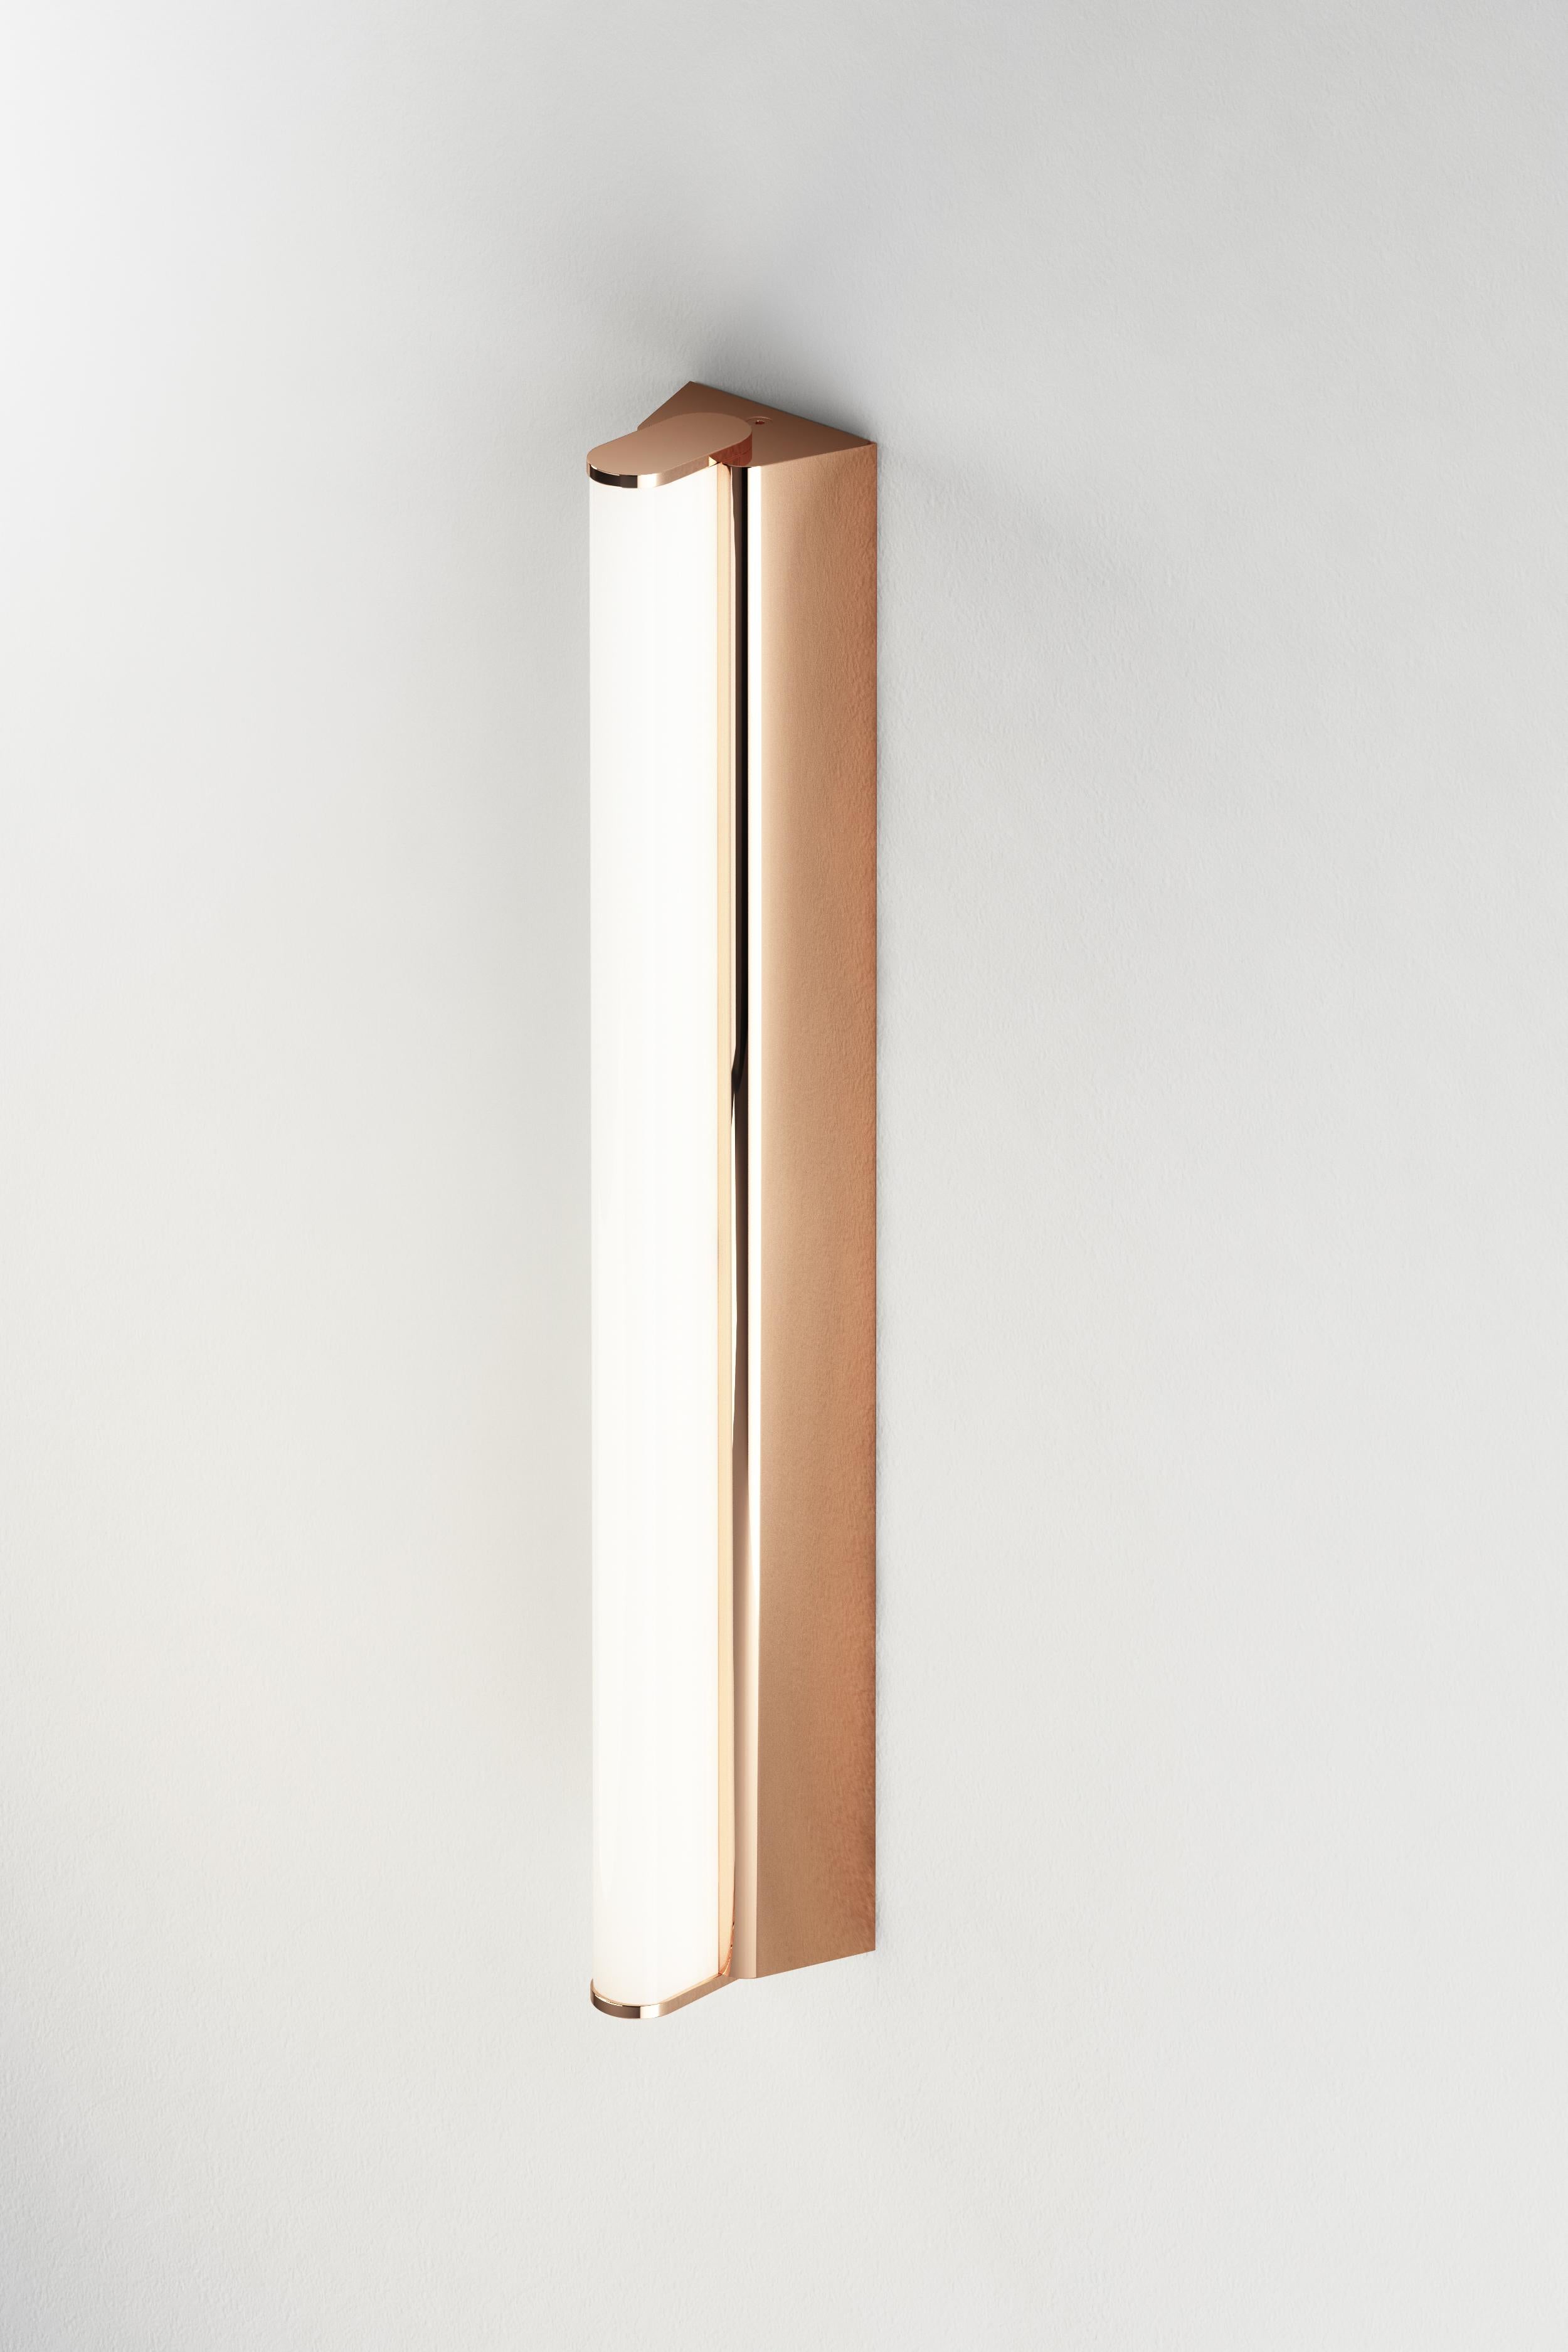 IP Metrop 325 polished copper wall light by Emilie Cathelineau
Dimensions: D 32.5 x W 5 x H 4.5 cm
Materials: Solid brass, polished copper, LED, polycarbonate.
Others finishes and dimensions are available.

All our lamps can be wired according